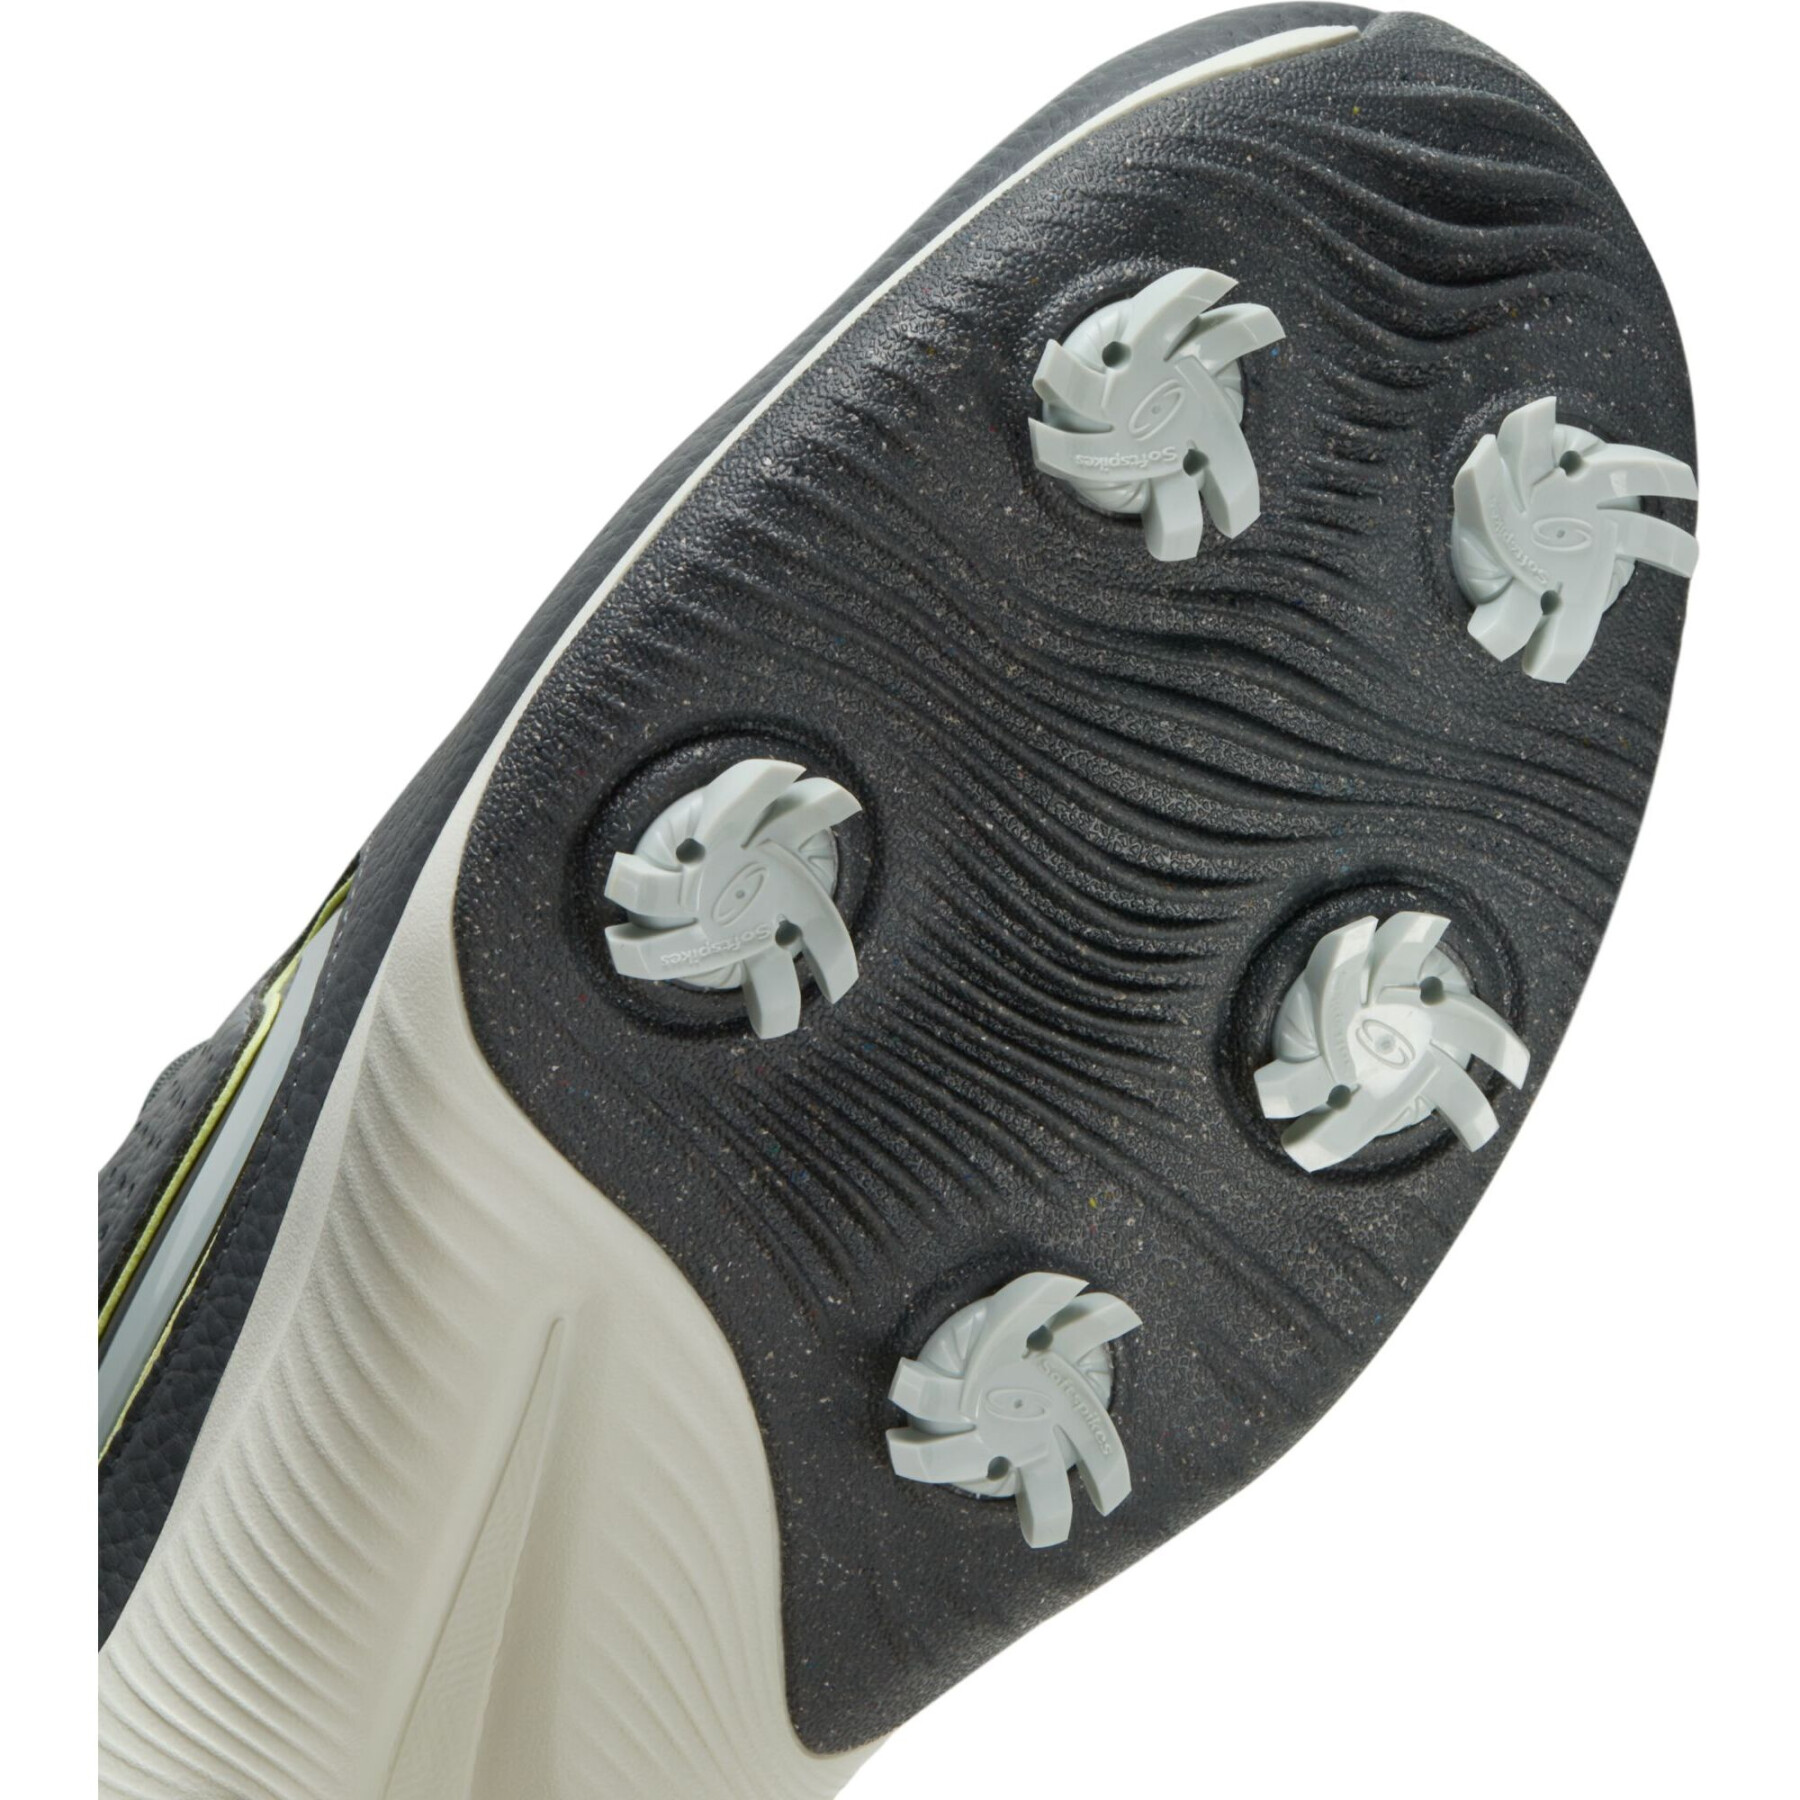 Golf shoes Nike Victory Pro 3